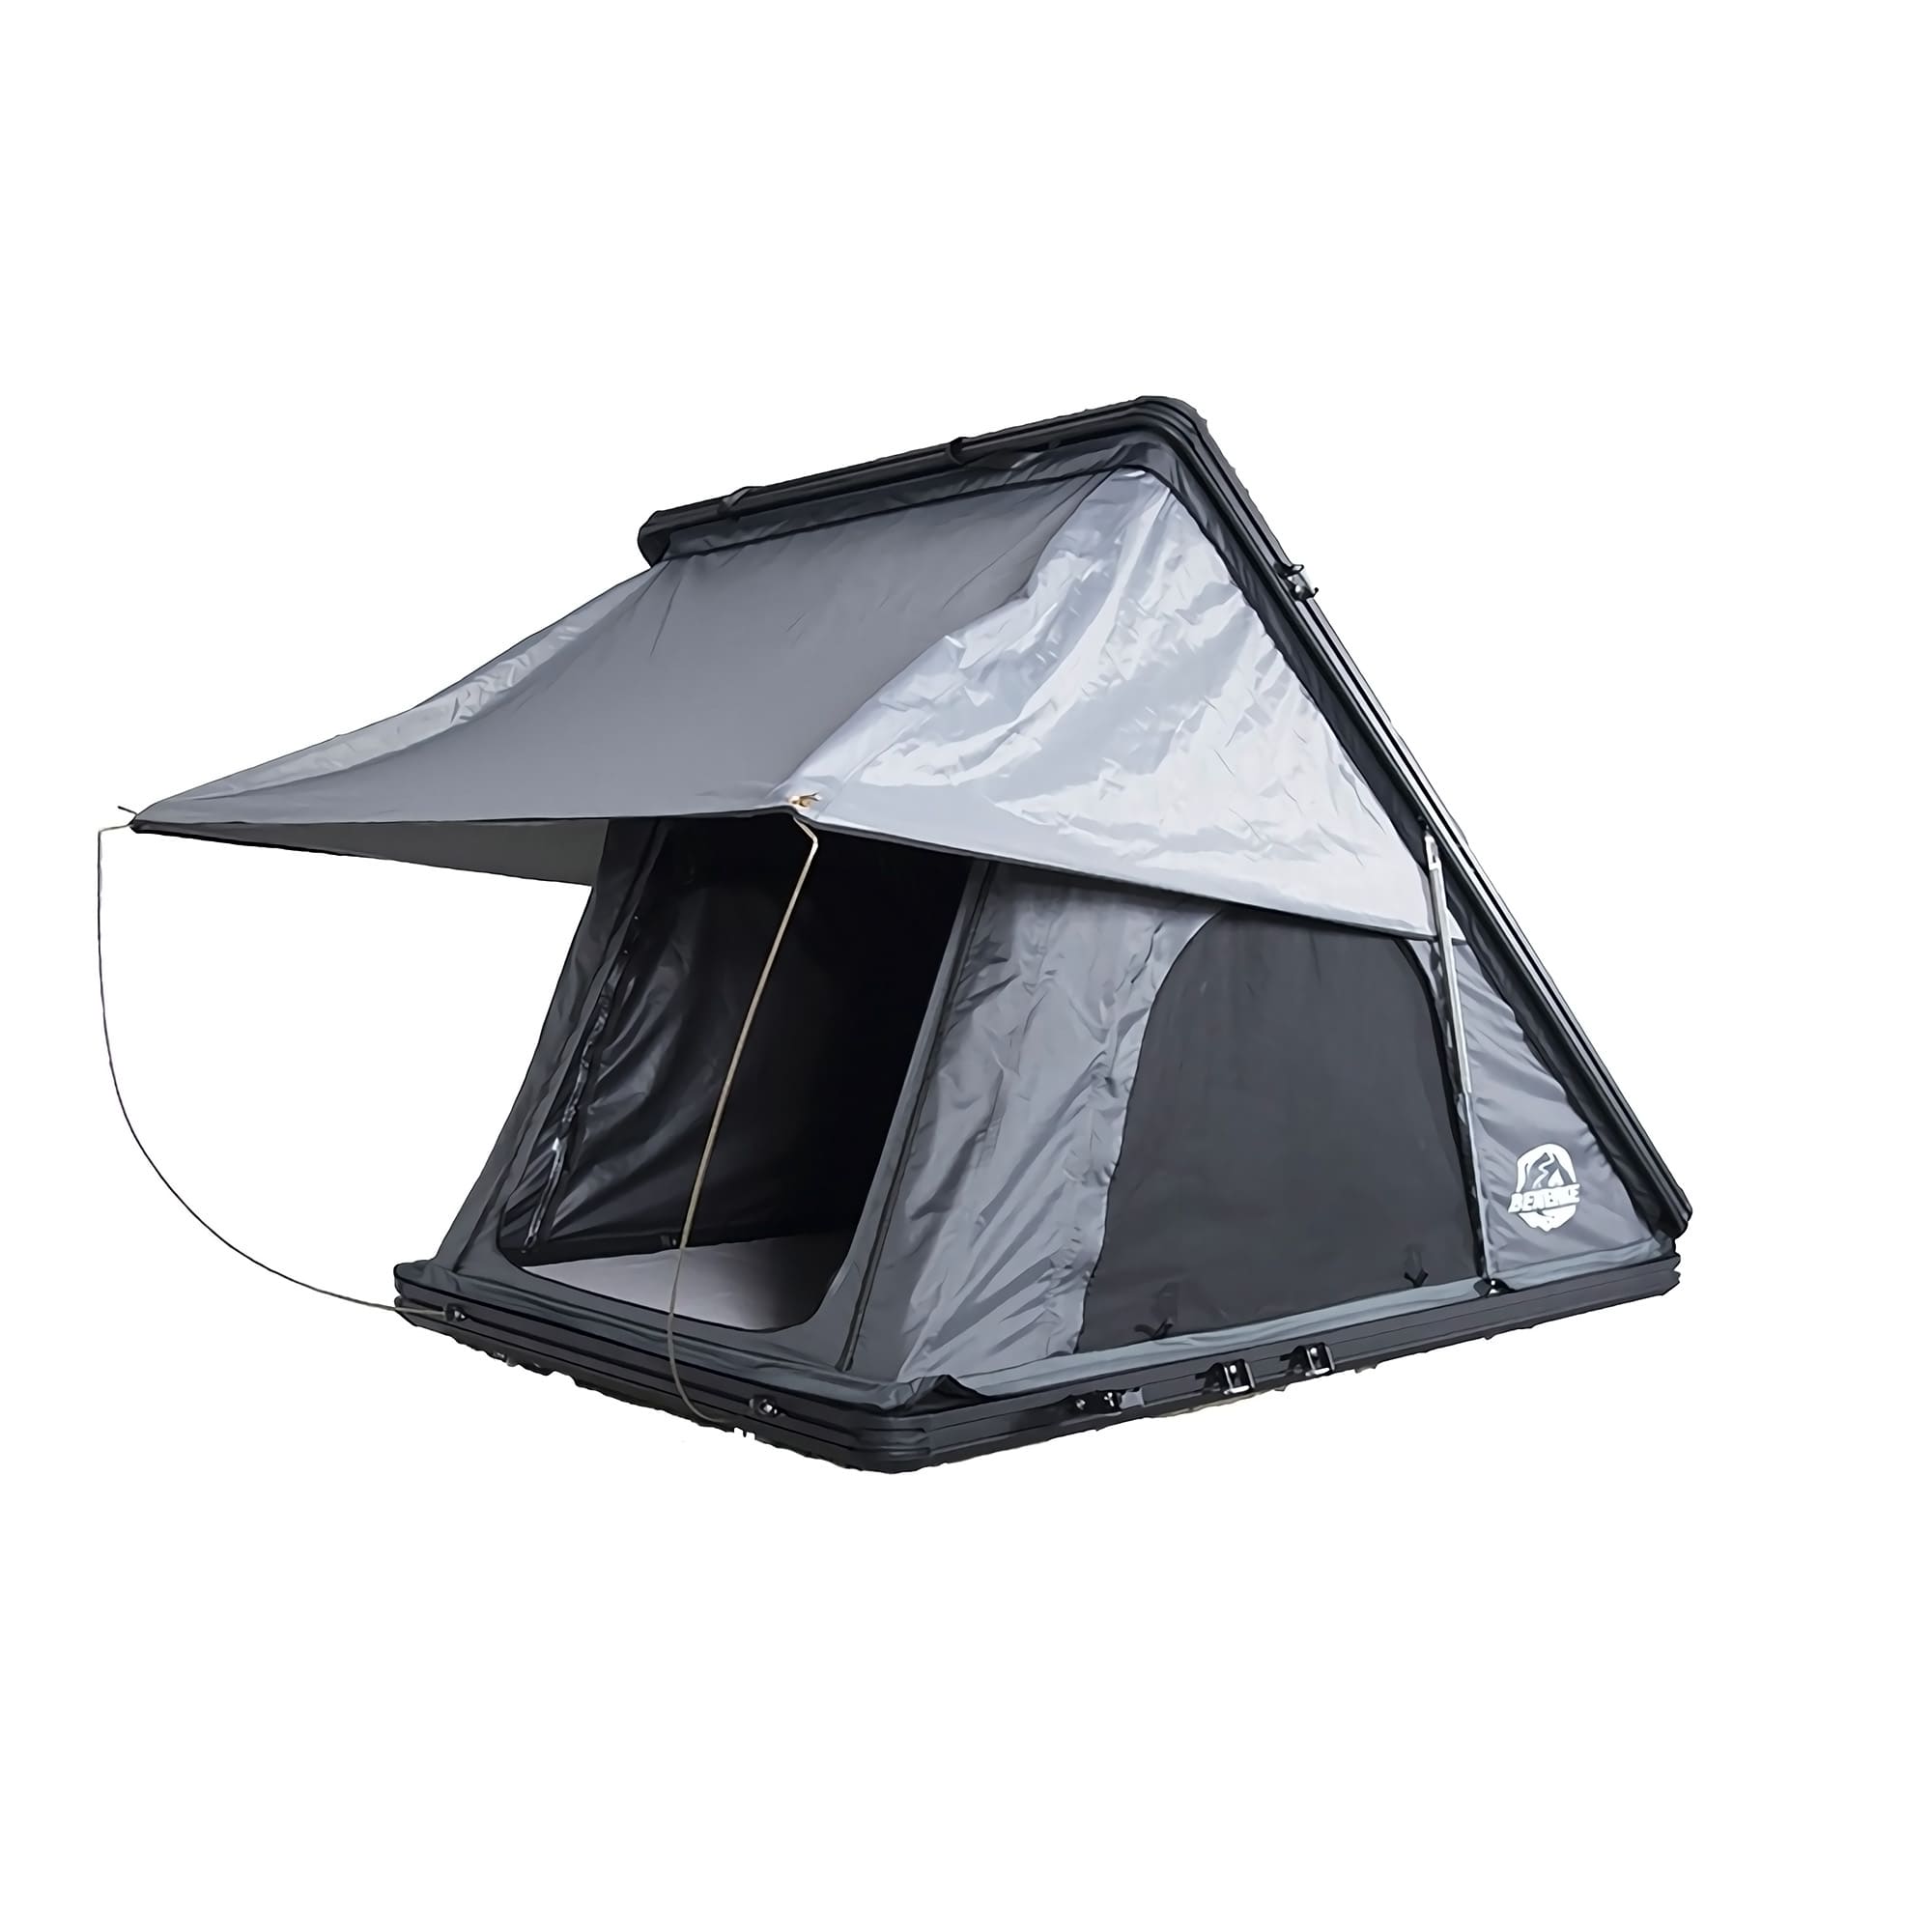  Evedy Roof Top Tent Camping, Aluminium Triangle Shell